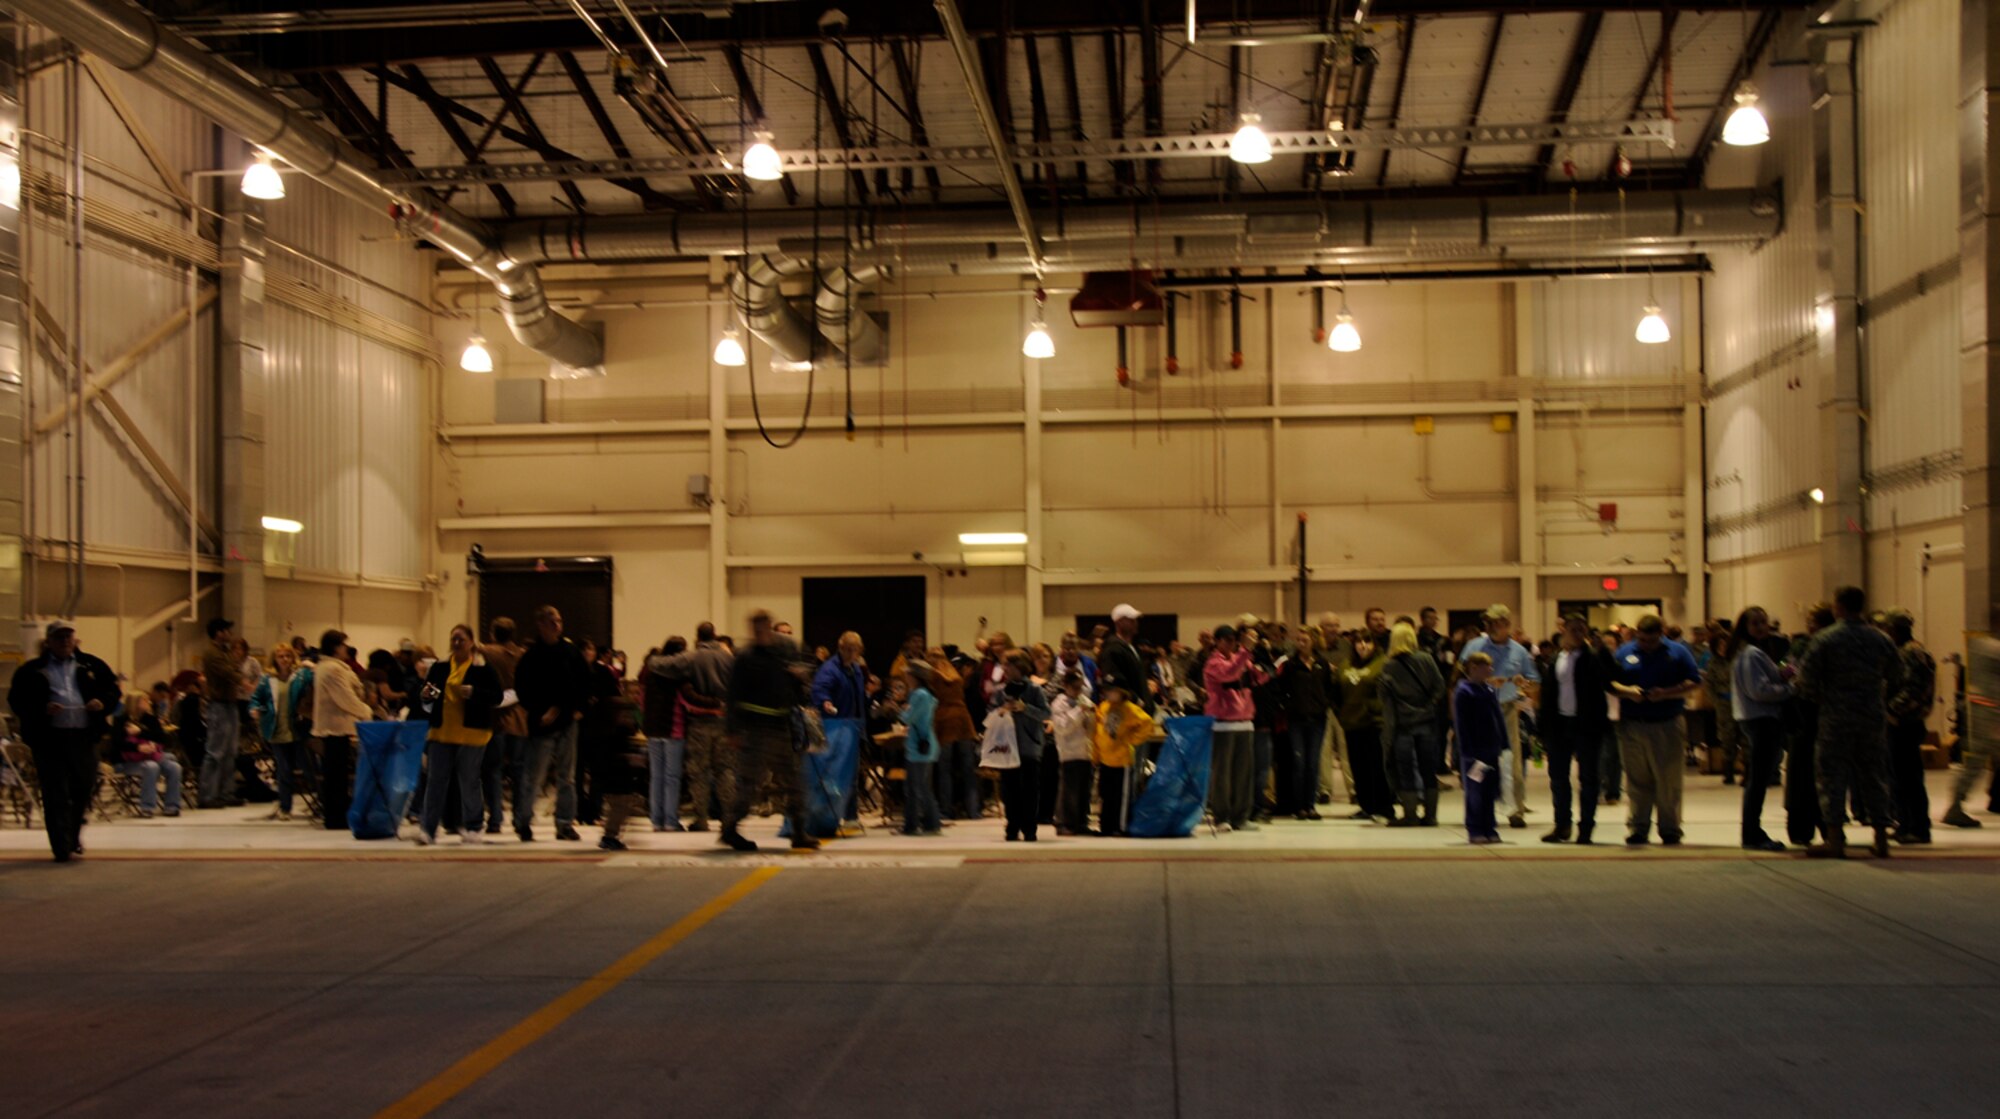 Family and friends of Airmen from the 188th Fighter Wing gather in the Consolidated Maintenance Facility for an official sendoff March 8, 2010. Members of the 188th Fighter Wing departed for an Aerospace Expeditionary Forces deployment March 8 at Fort Smith, Ark. The 188th will be deployed to Kandahar, Afghanistan, for more than two months. The 188th will be attached to the 451st Expeditionary Wing while at Kandahar Airfield. This marks the 188th's first combat deployment with the A-10 Thunderbolt II "Warthog." (U.S. Air Force photo by Tech Sgt. Stephen M. Hornsey/188th Fighter Wing Public Affairs) 